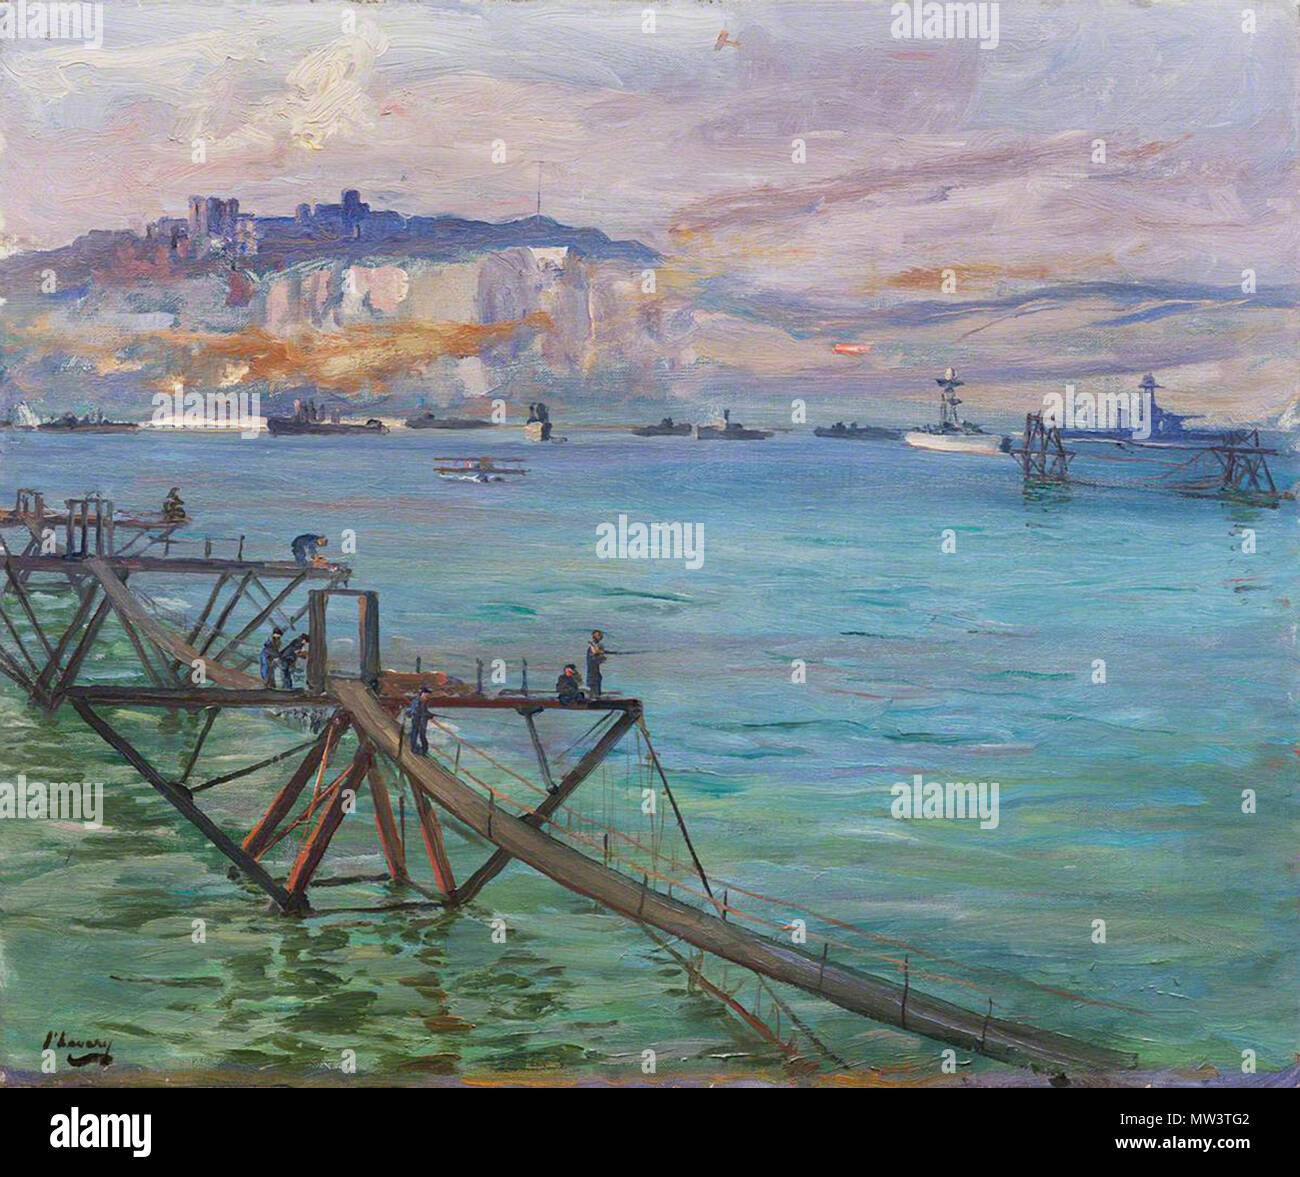 . Джон Лавери (англ. John Lavery) (1856—1941) — ирландский художник, мастер портретной и пейзажной живописи. ================== Sir John Lavery RA (20 March 1856 – 10 January 1941) was an Irish painter best known for his portraits and wartime depictions. www.youtube.com/watch?v=yRaCb7czsQI . 2 March 2016, 05:44. Leonid Ll 594 The Entrance, Dover Harbour, 1918- In the Foreground Are the Harbour Protection Nets against Enemy Submarines (37687820525) Stock Photo